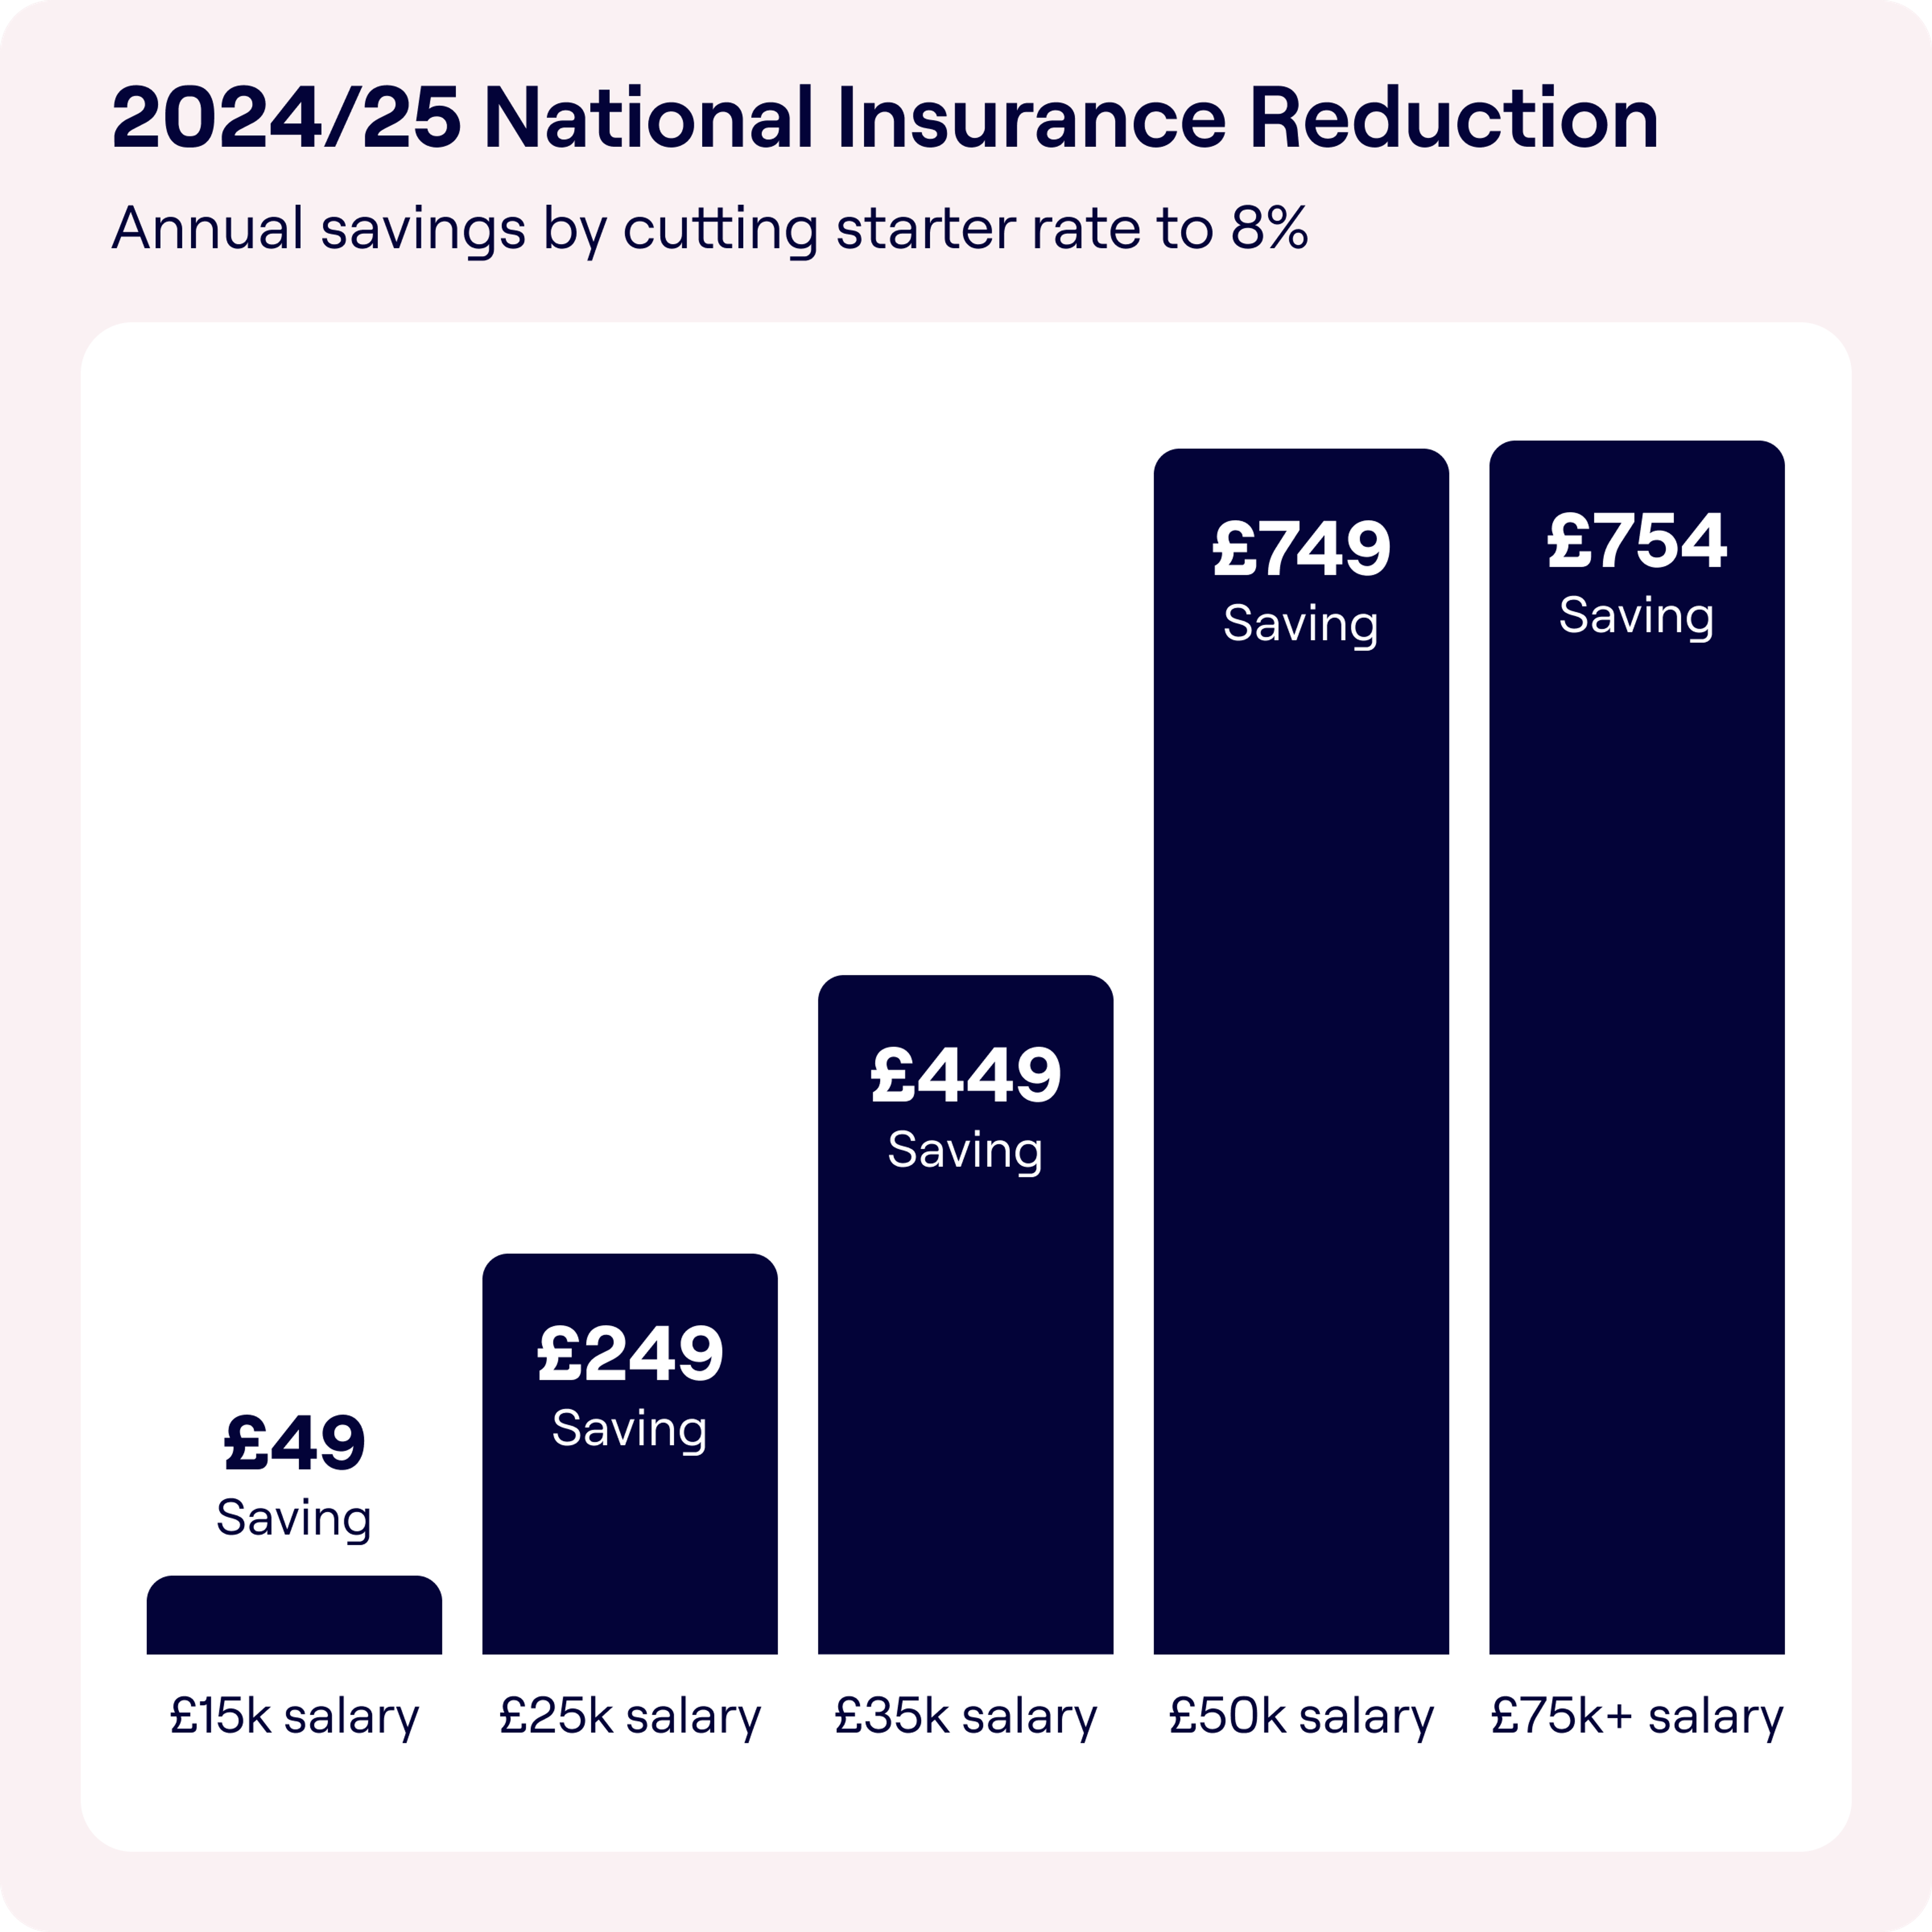 Infographic for the 2024/25 National Insurance Reduction. It shows annual savings by cutting starter rate to 8%, with ascending bars indicating savings for different salaries: £49 for £15k, £249 for £25k, £449 for £35k, £749 for £50k, and £754 for £75k+ salary.